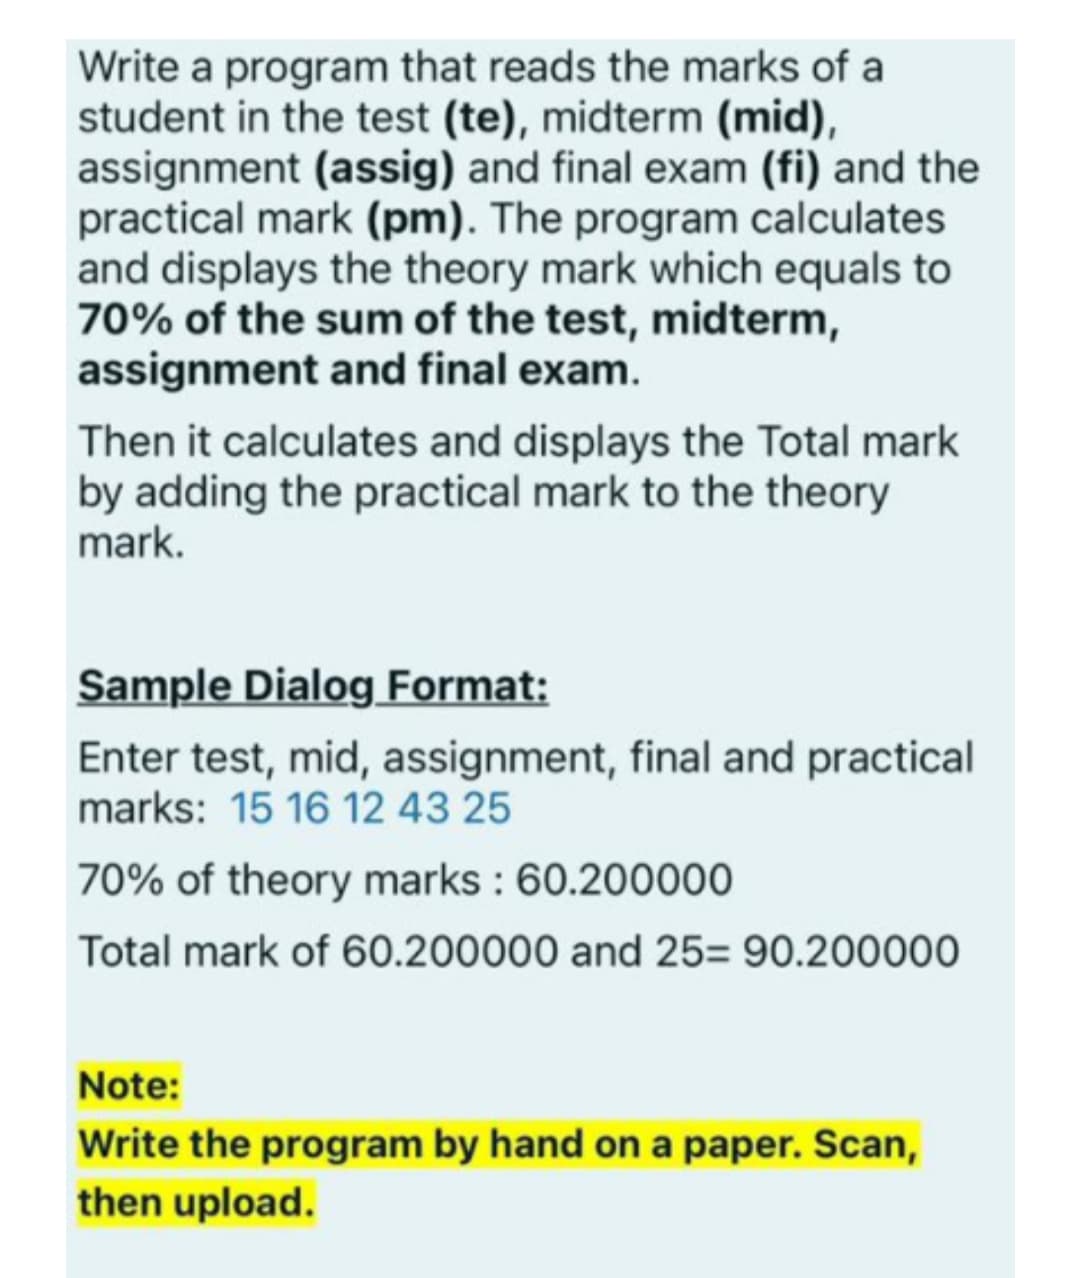 Write a program that reads the marks of a
student in the test (te), midterm (mid),
assignment (assig) and final exam (fi) and the
practical mark (pm). The program calculates
and displays the theory mark which equals to
70% of the sum of the test, midterm,
assignment and final exam.
Then it calculates and displays the Total mark
by adding the practical mark to the theory
mark.
Sample Dialog Format:
Enter test, mid, assignment, final and practical
marks: 15 16 12 43 25
70% of theory marks : 60.200000
Total mark of 60.200000 and 25= 90.200000
Note:
Write the program by hand on a paper. Scan,
then upload.
